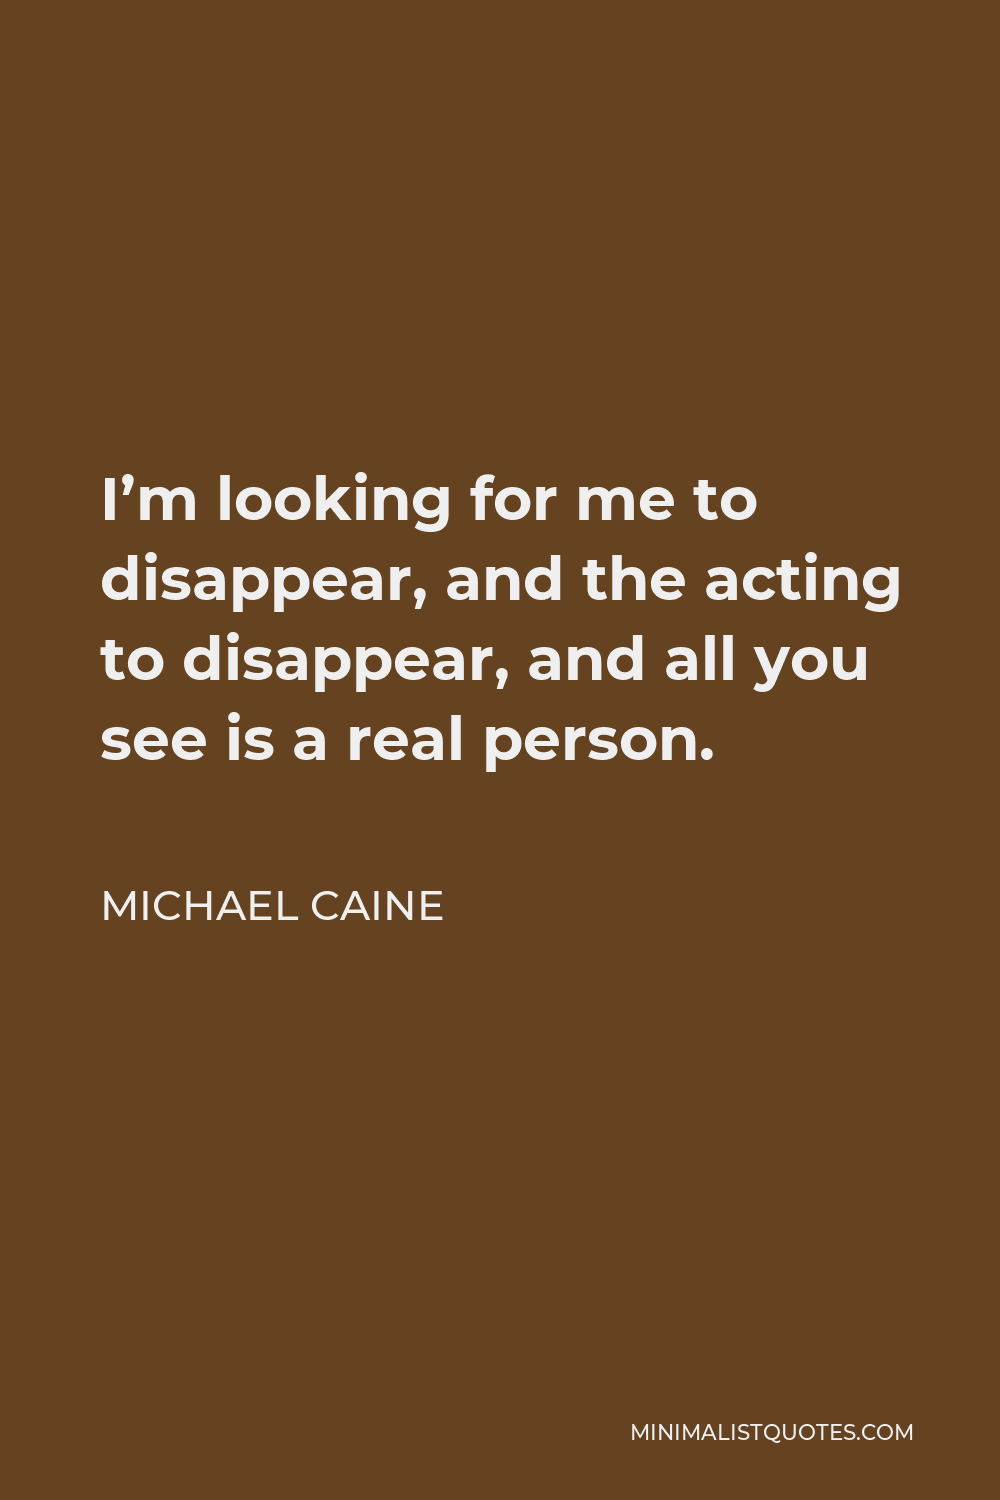 Michael Caine Quote - I’m looking for me to disappear, and the acting to disappear, and all you see is a real person.